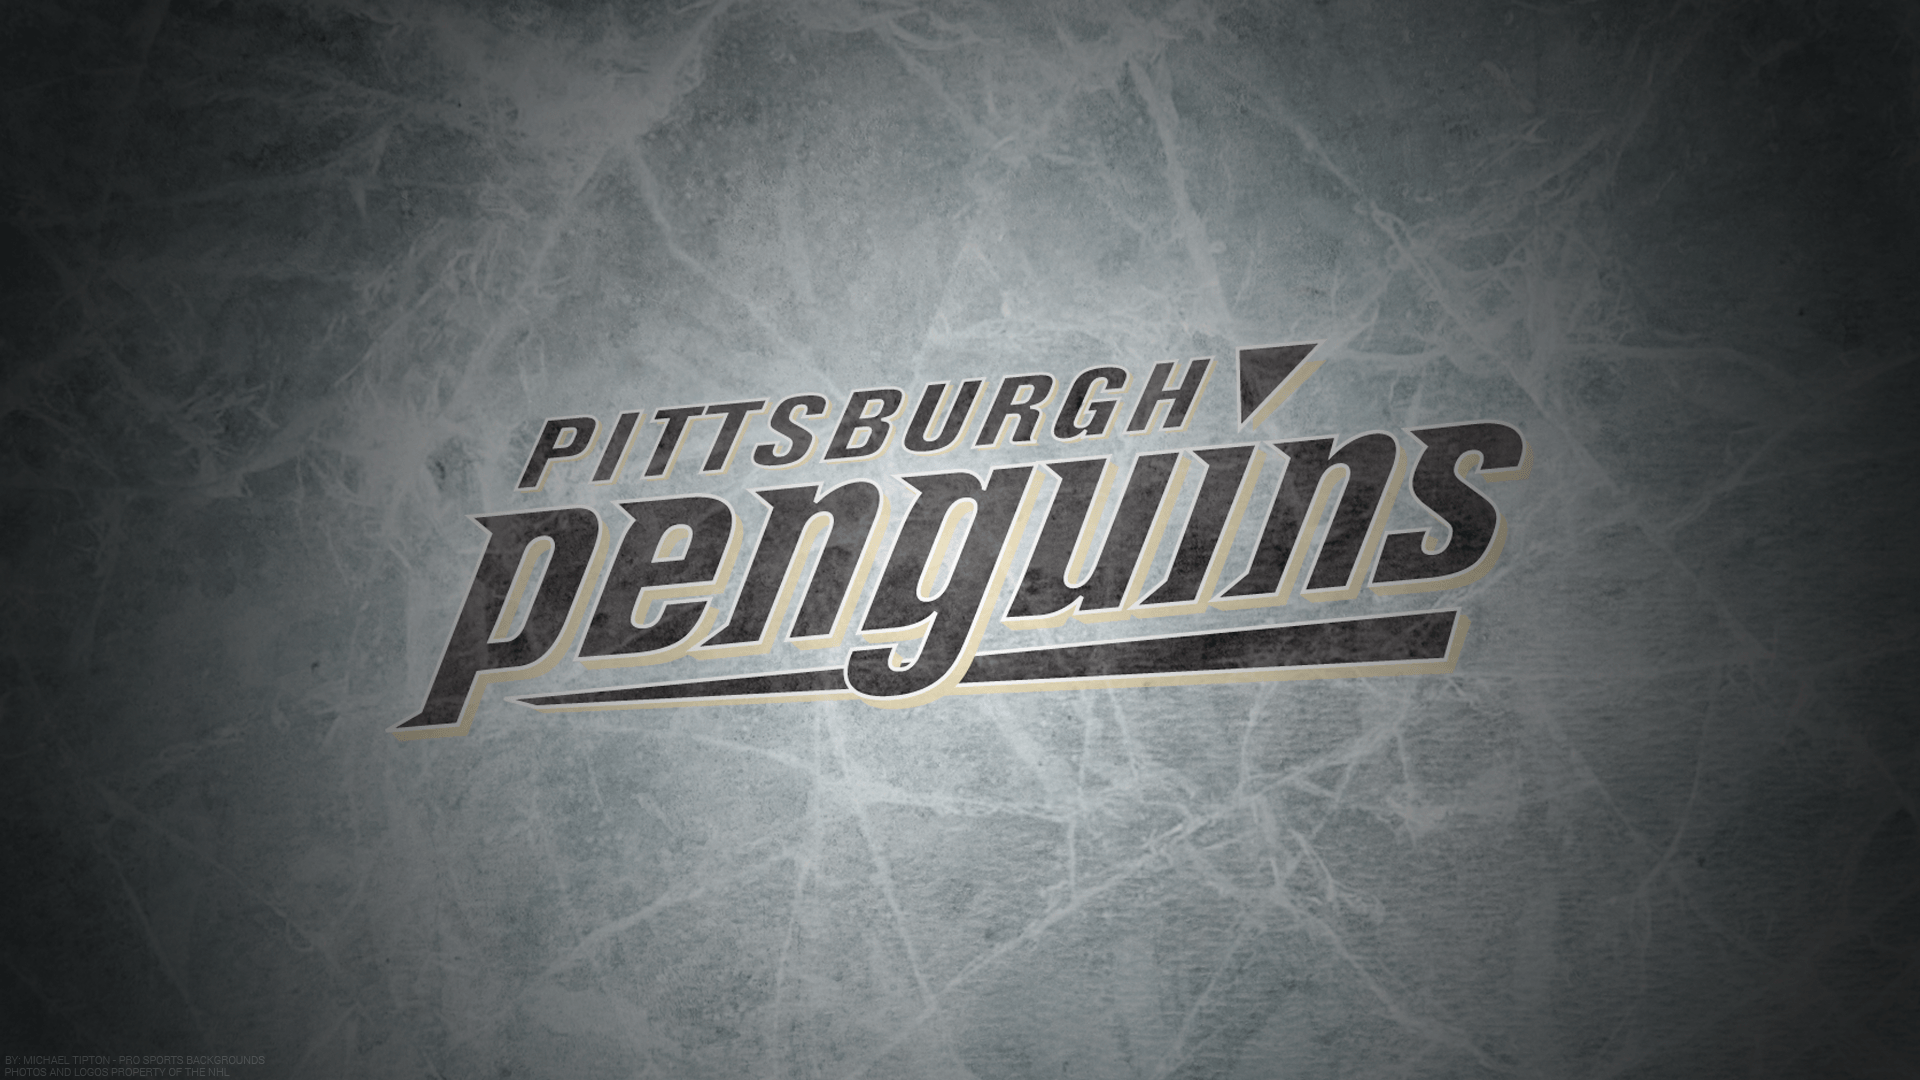 Pittsburgh Penguins Wallpaper. iPhone. Android